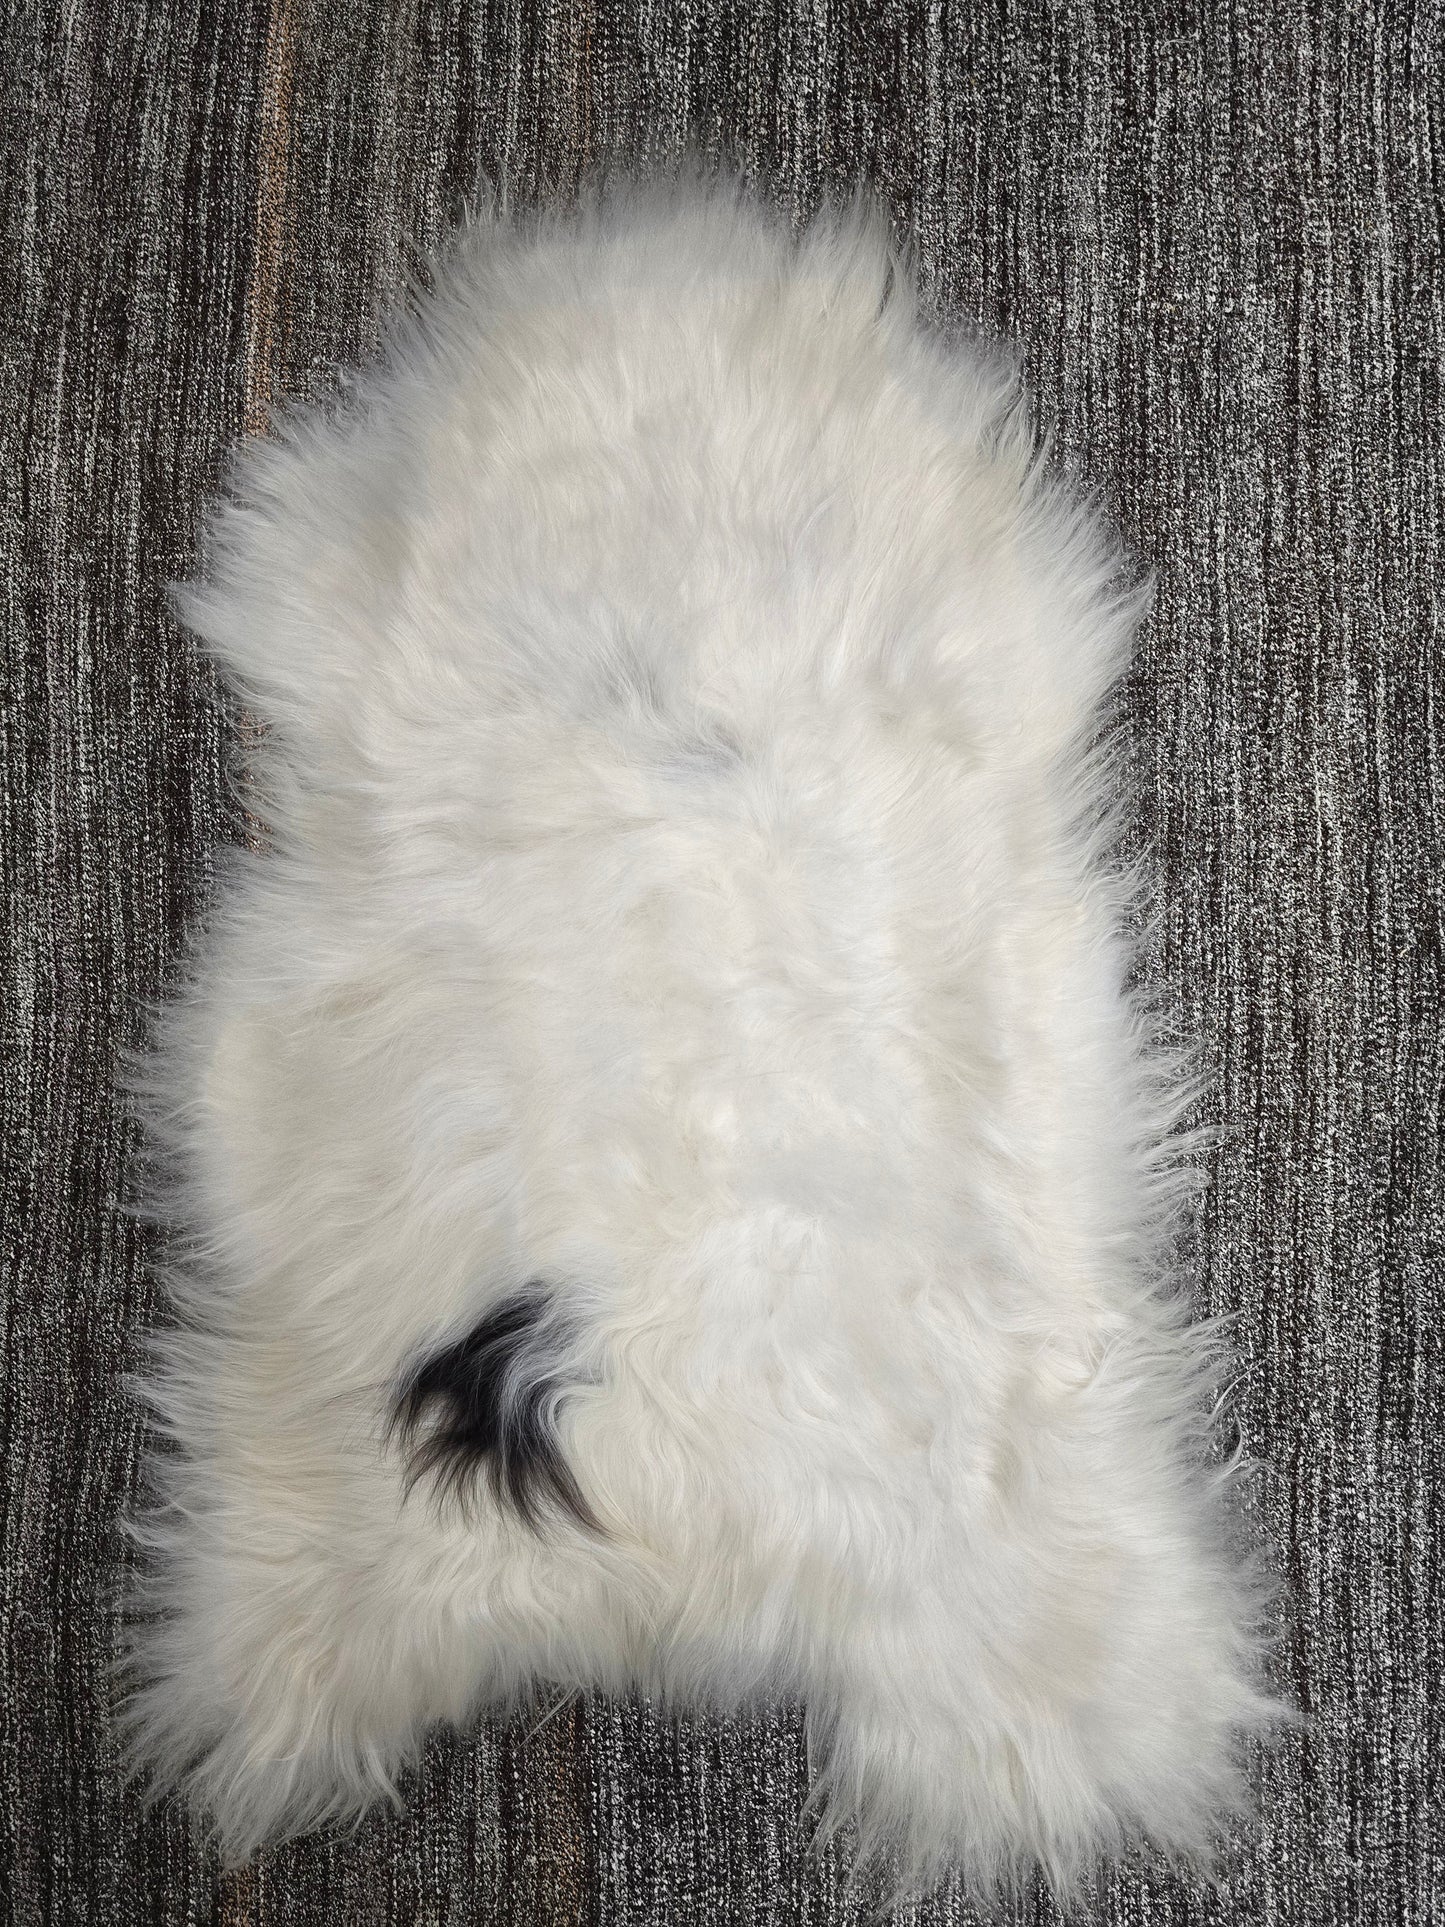 ONE OF THE KIND Icelandic White with Black Spot Sheepskin